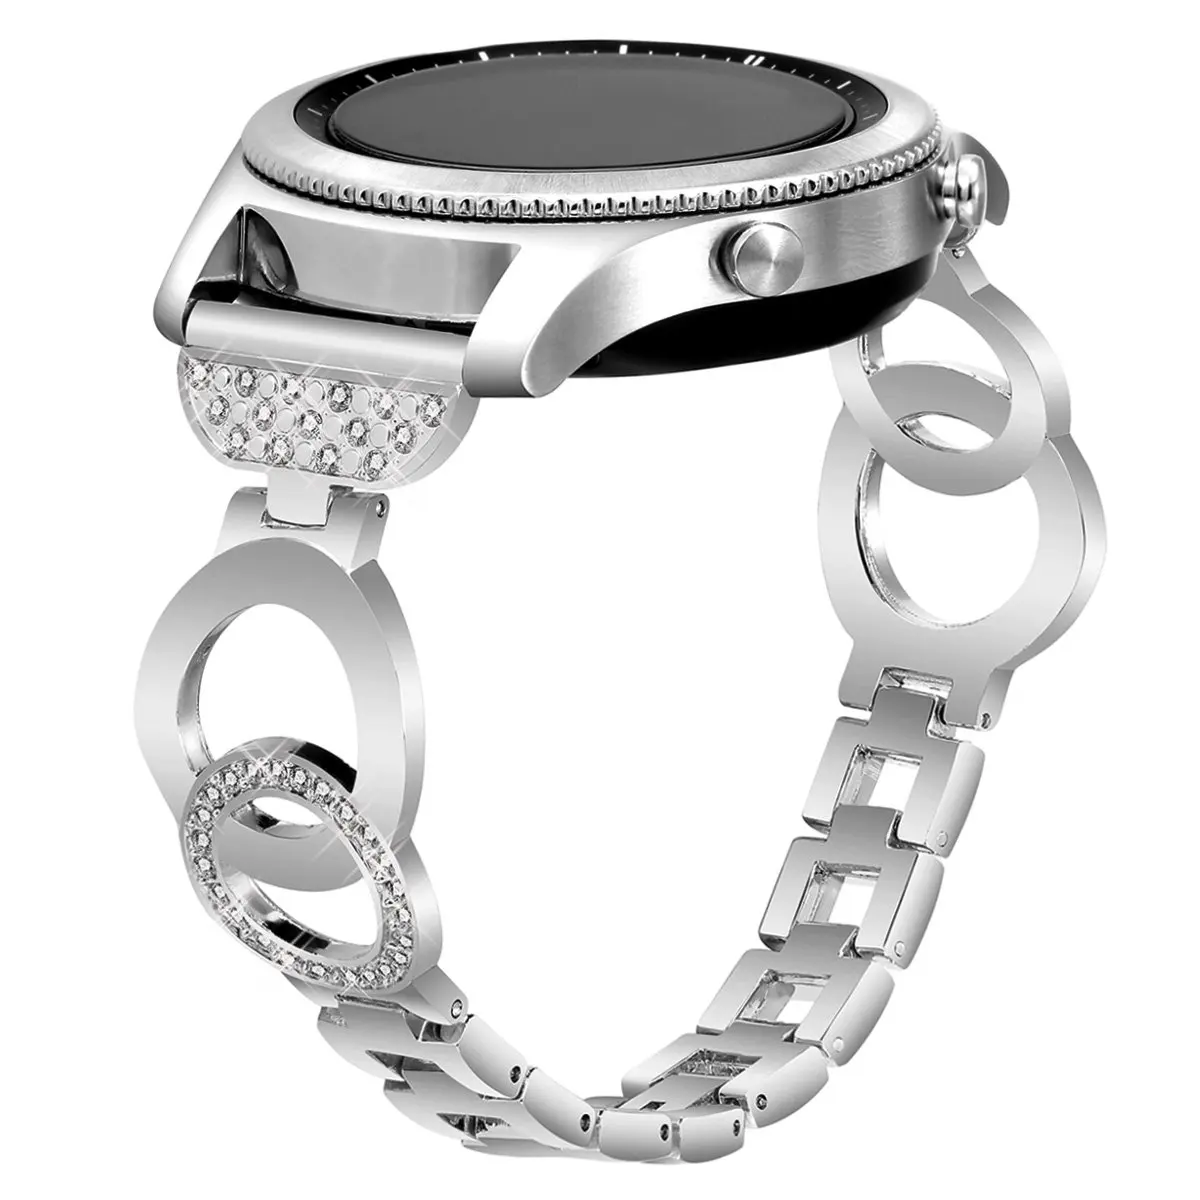 Buy Samsung Gear S2 Classic R732 Bands, Fose Stainless Steel Metal ...